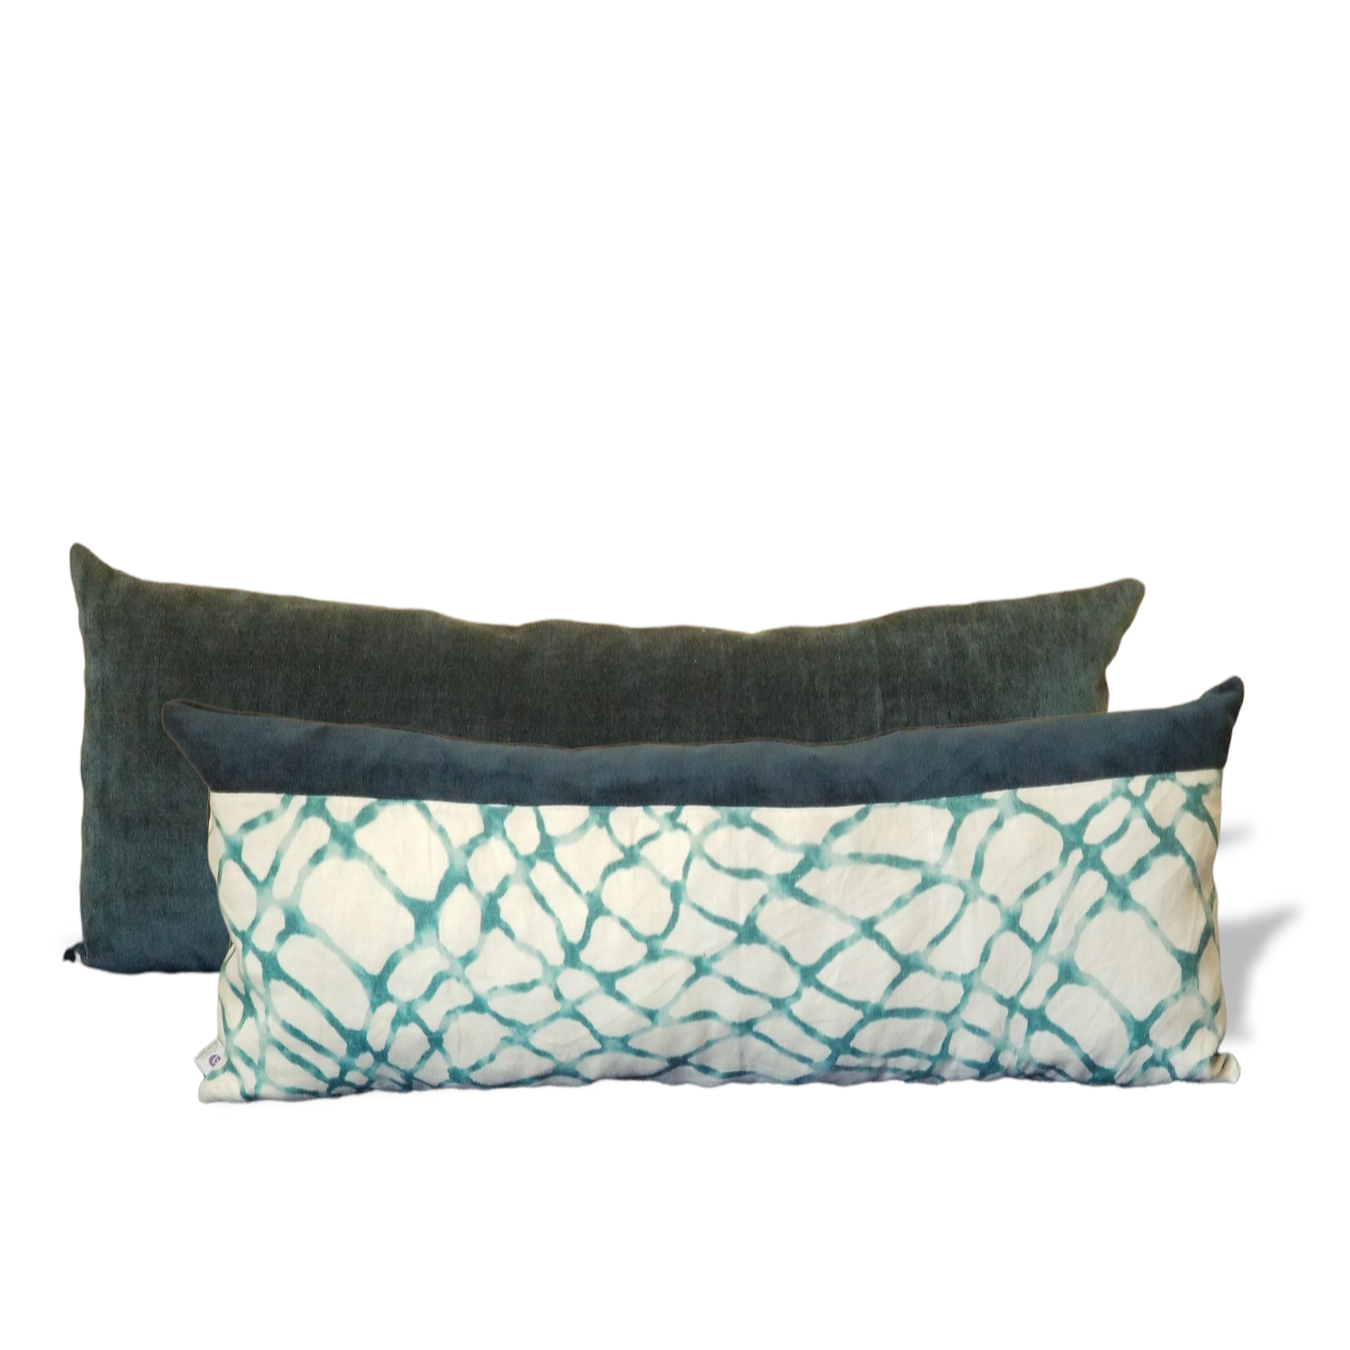 Coastal Allure. Made from the opulent Water Polo Lagoon Kravet Fabric. Coastal themed for your bedroom, vacation home, livingroom and more.  Make a statement.  Advenique home decor has A Designer  pillow with teal snd blue on sale.  Decorative throw pillow on display with Jeffrey alan marks water polo fabric. 